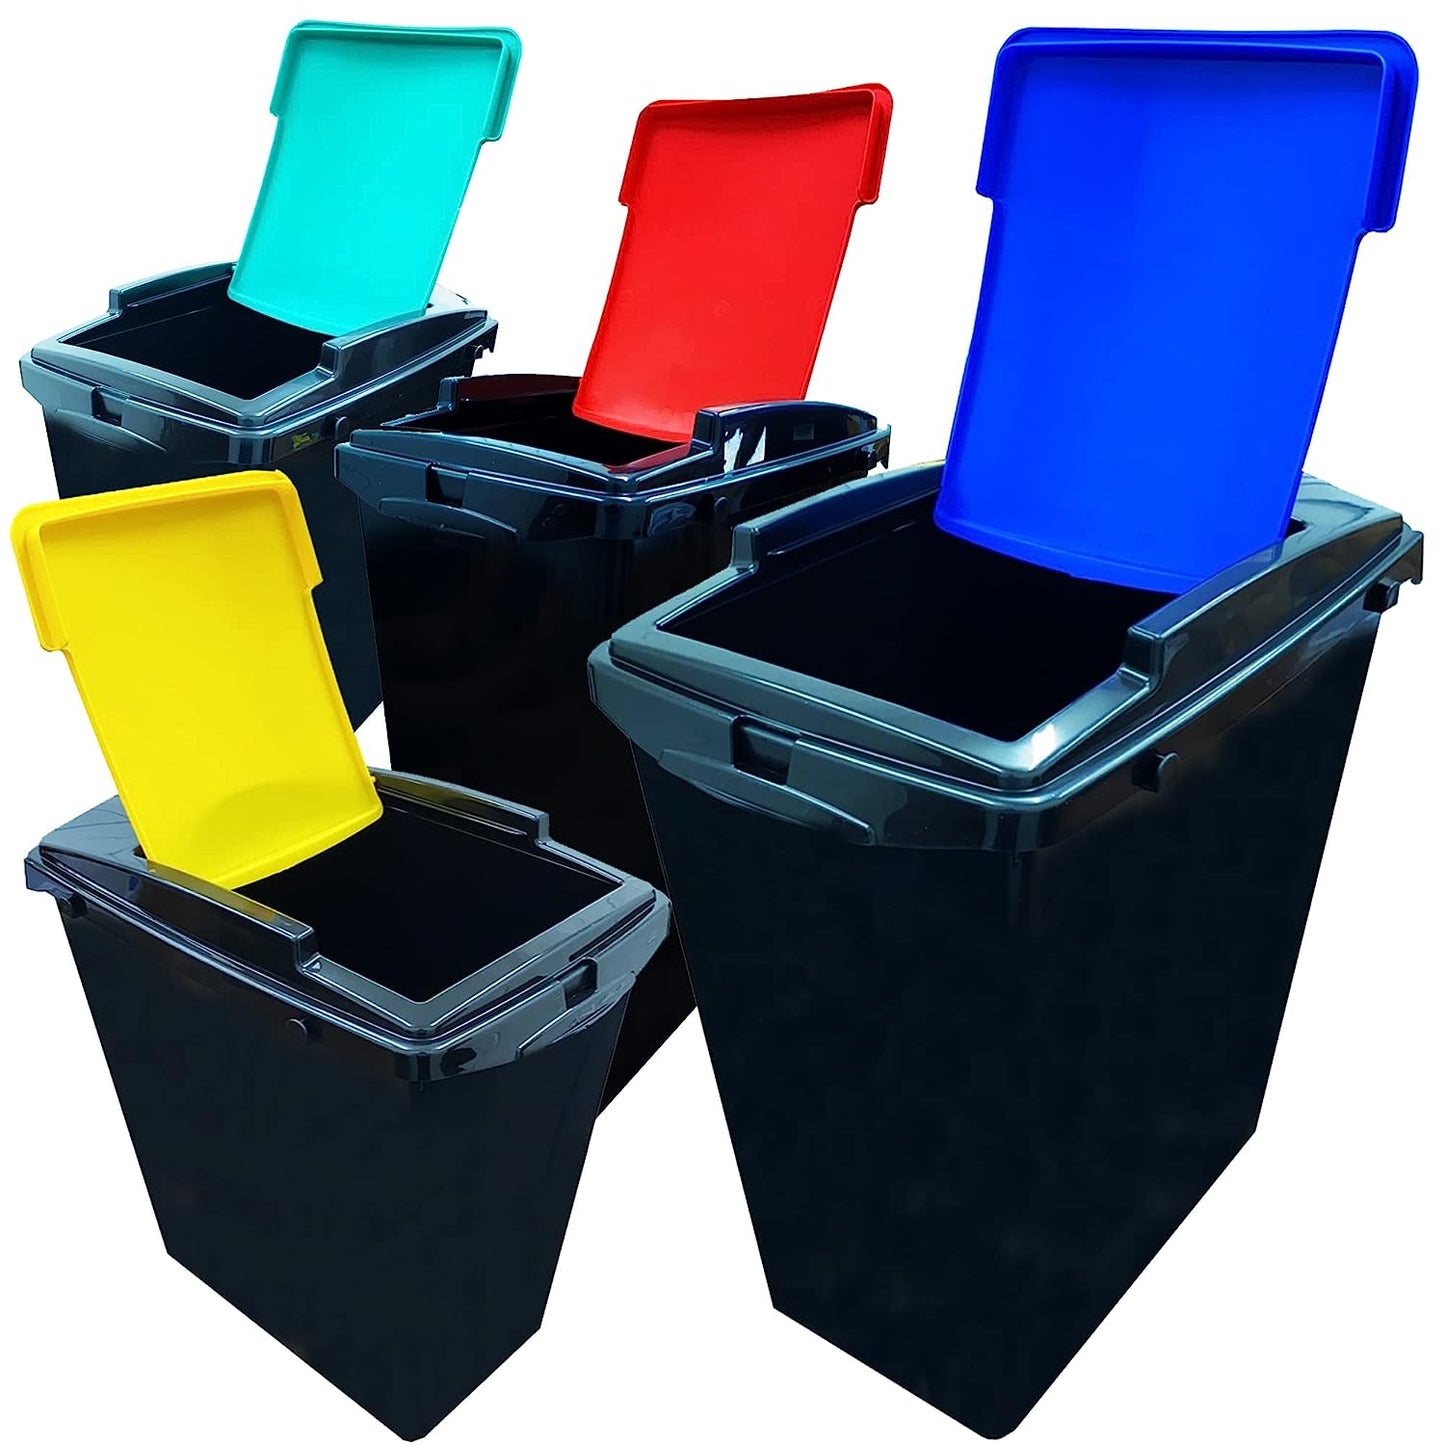 40 Litre Black Plastic Recycling Bins With Colour Coded Swing Lids